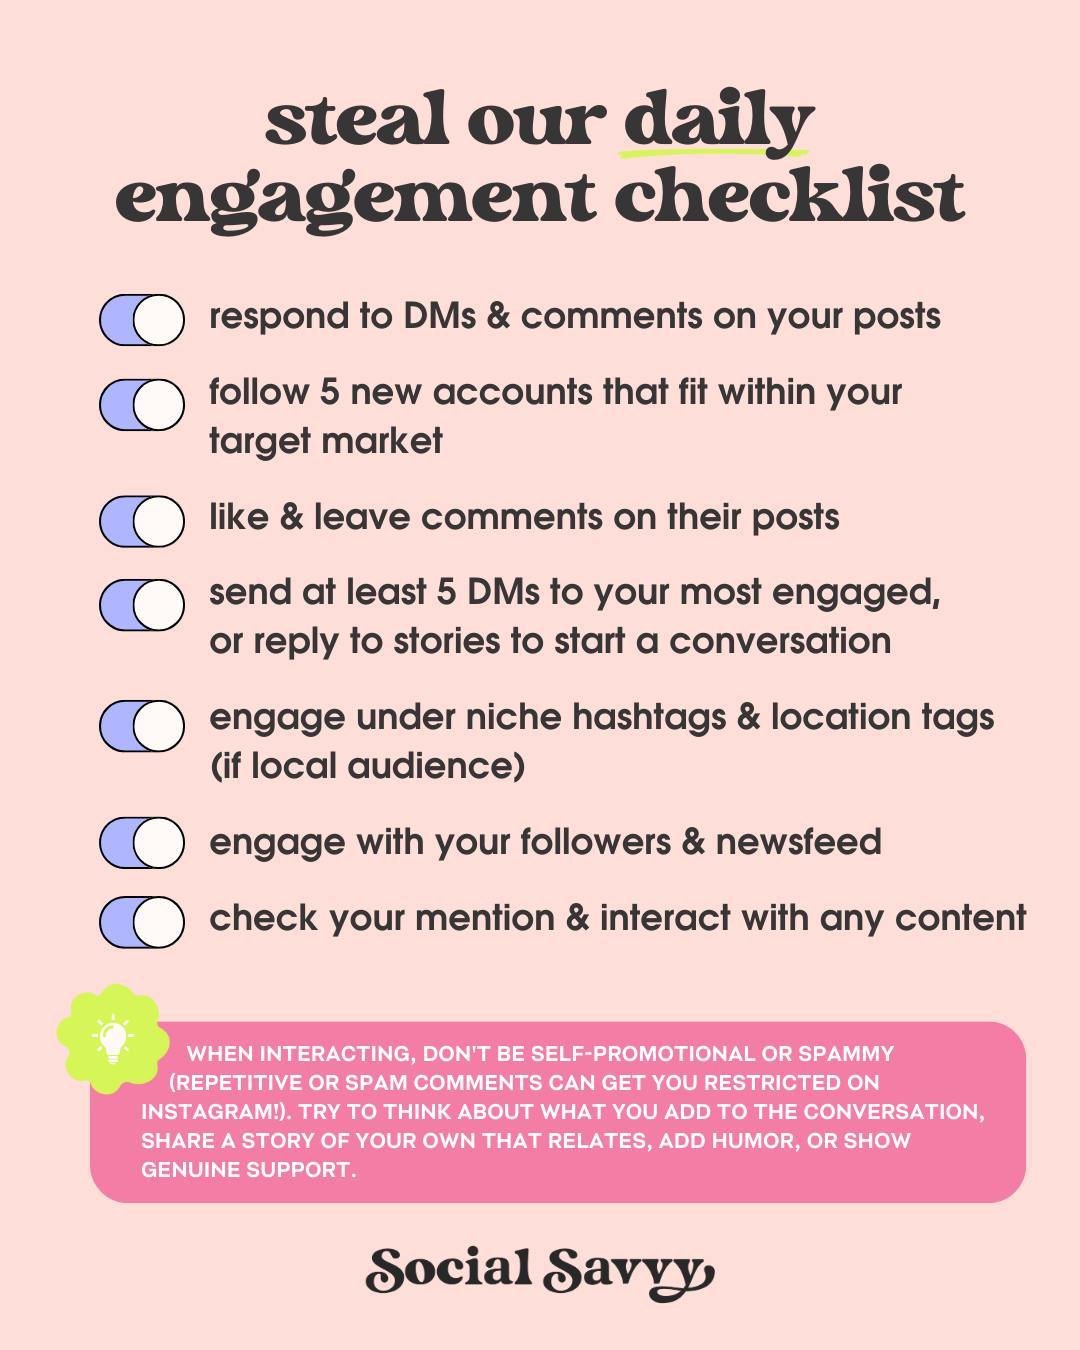 is it stealing if it's free?⁠
⁠
🤝 comment 'SAVVY' if you want to learn more about working with us⁠
⁠.⁠
.⁠
.⁠
.⁠
#engagementchecklist #dailyengagement #socialmediatips #socialtips #engagingonsocials